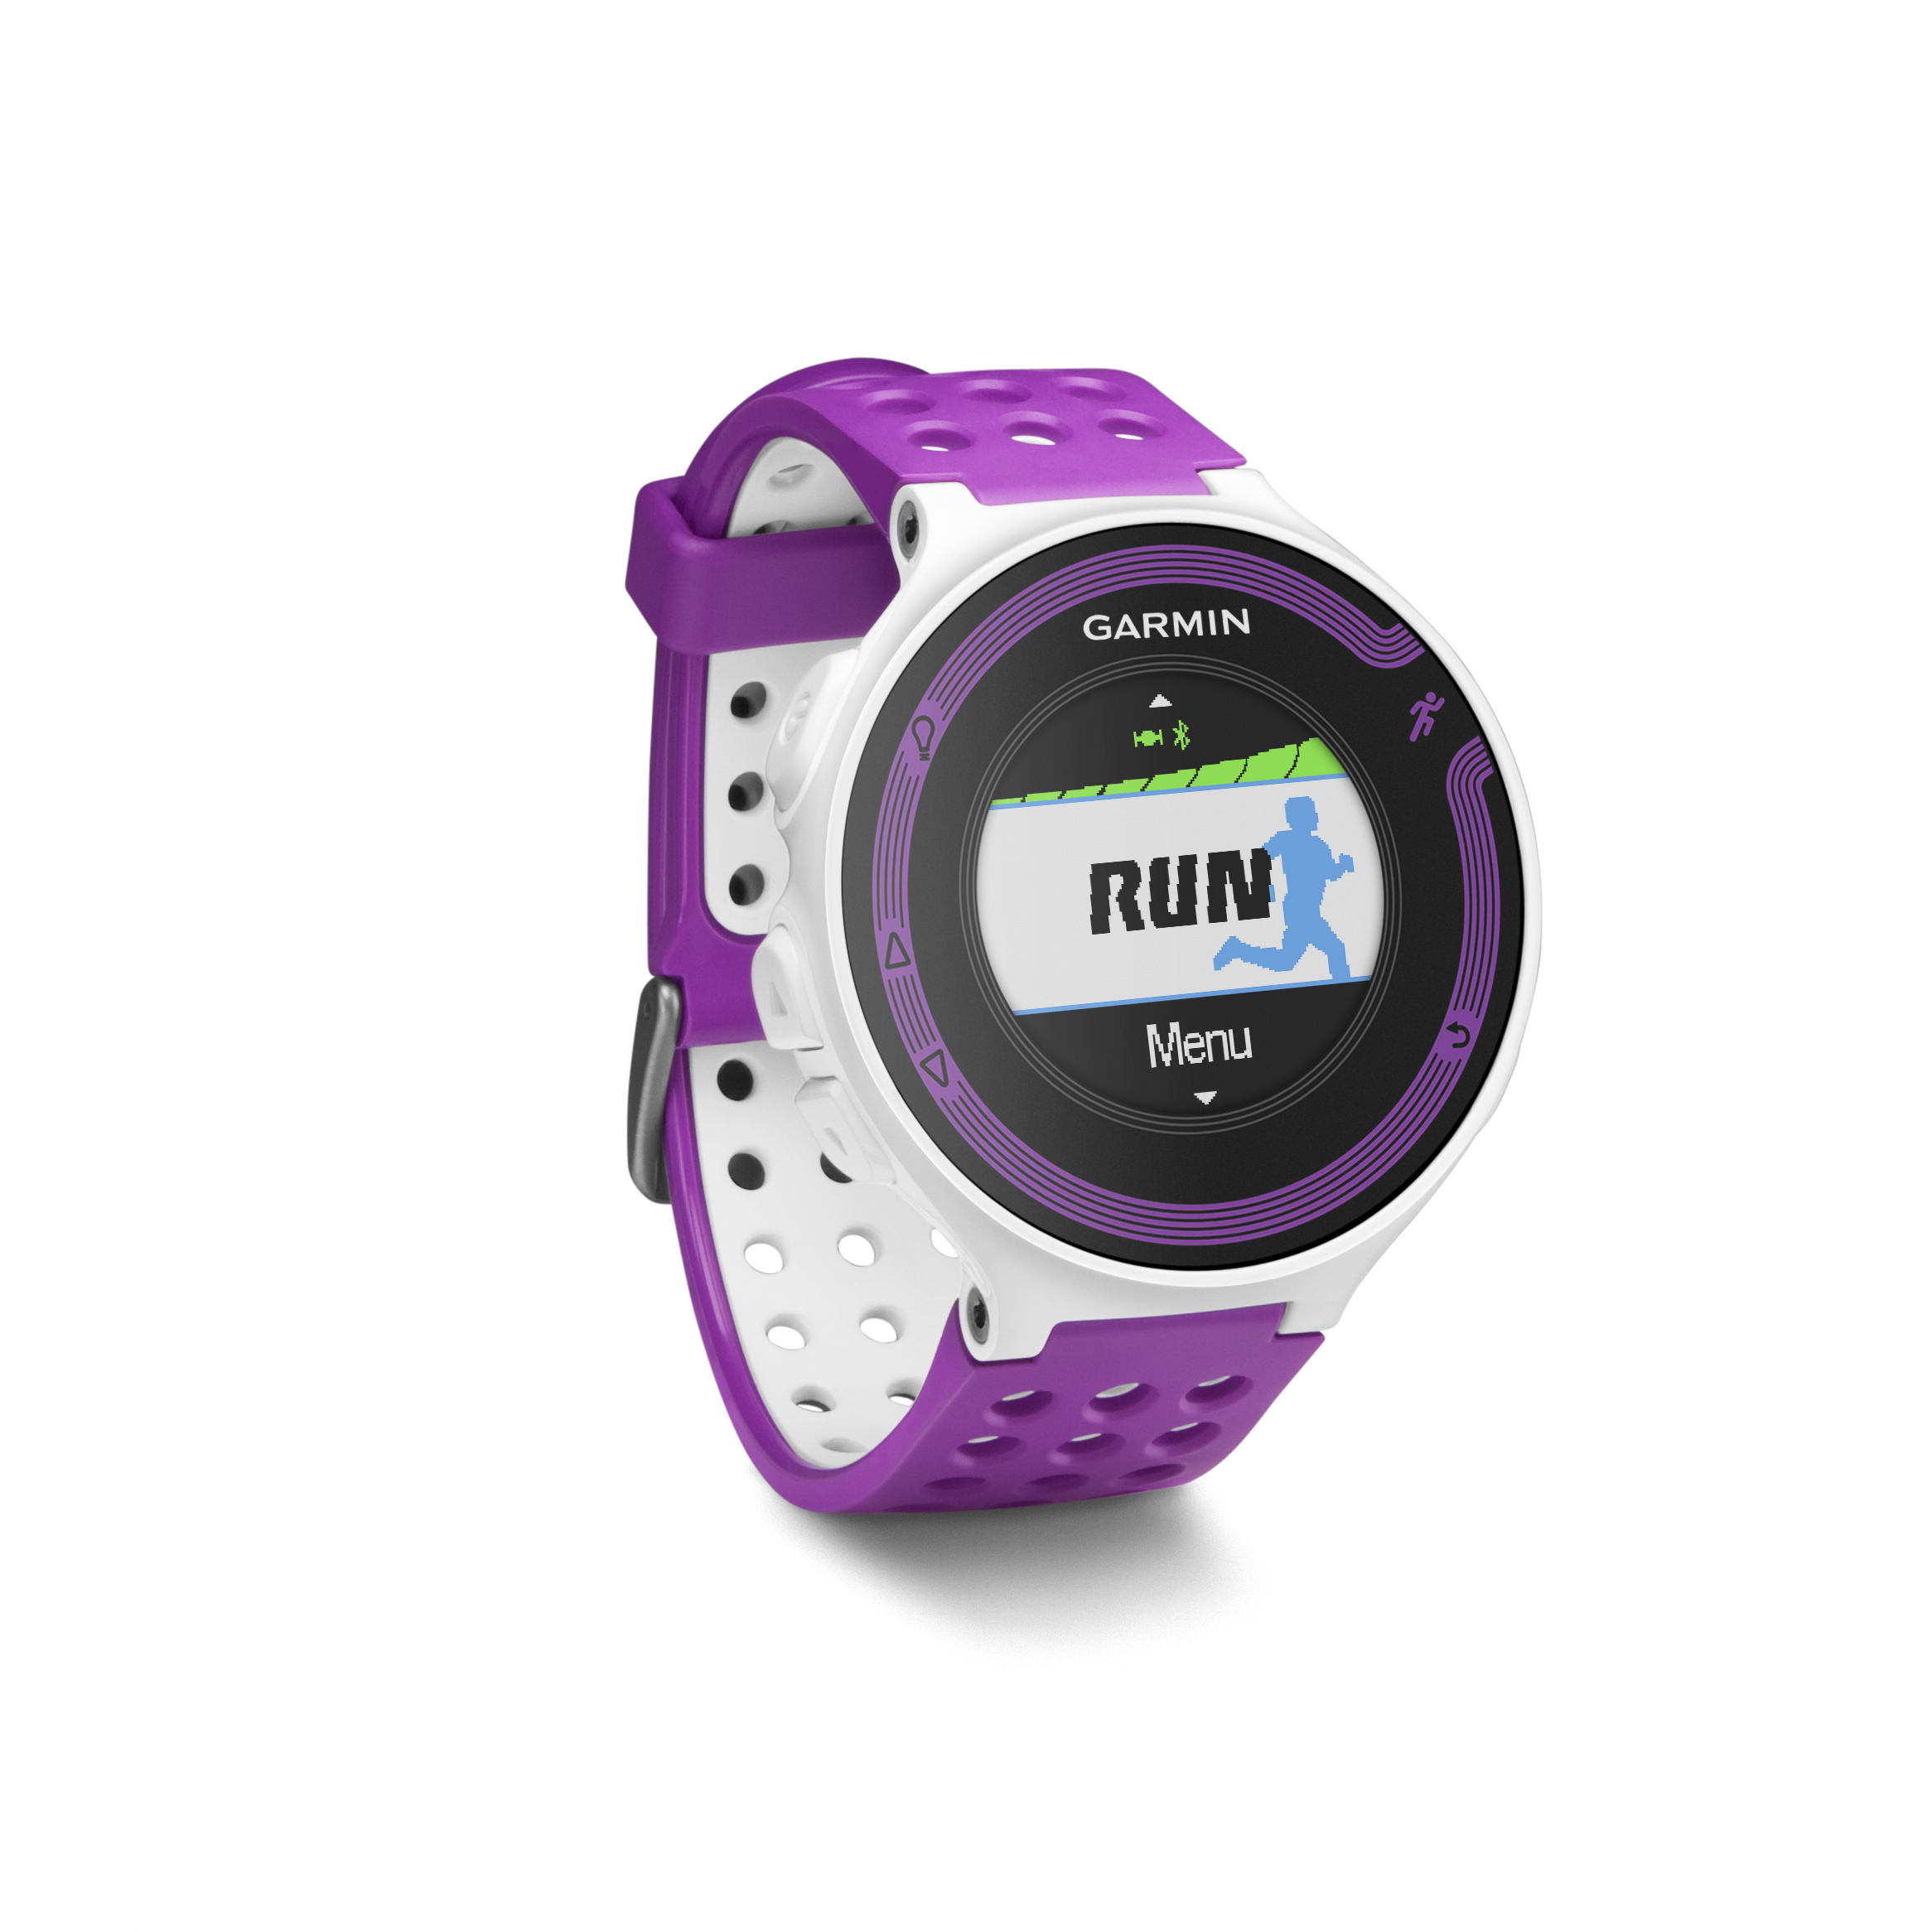 How the Garmin Forerunner 245 Made Me a Better Runner — An Annual Review, by Chandrahaas Vadali